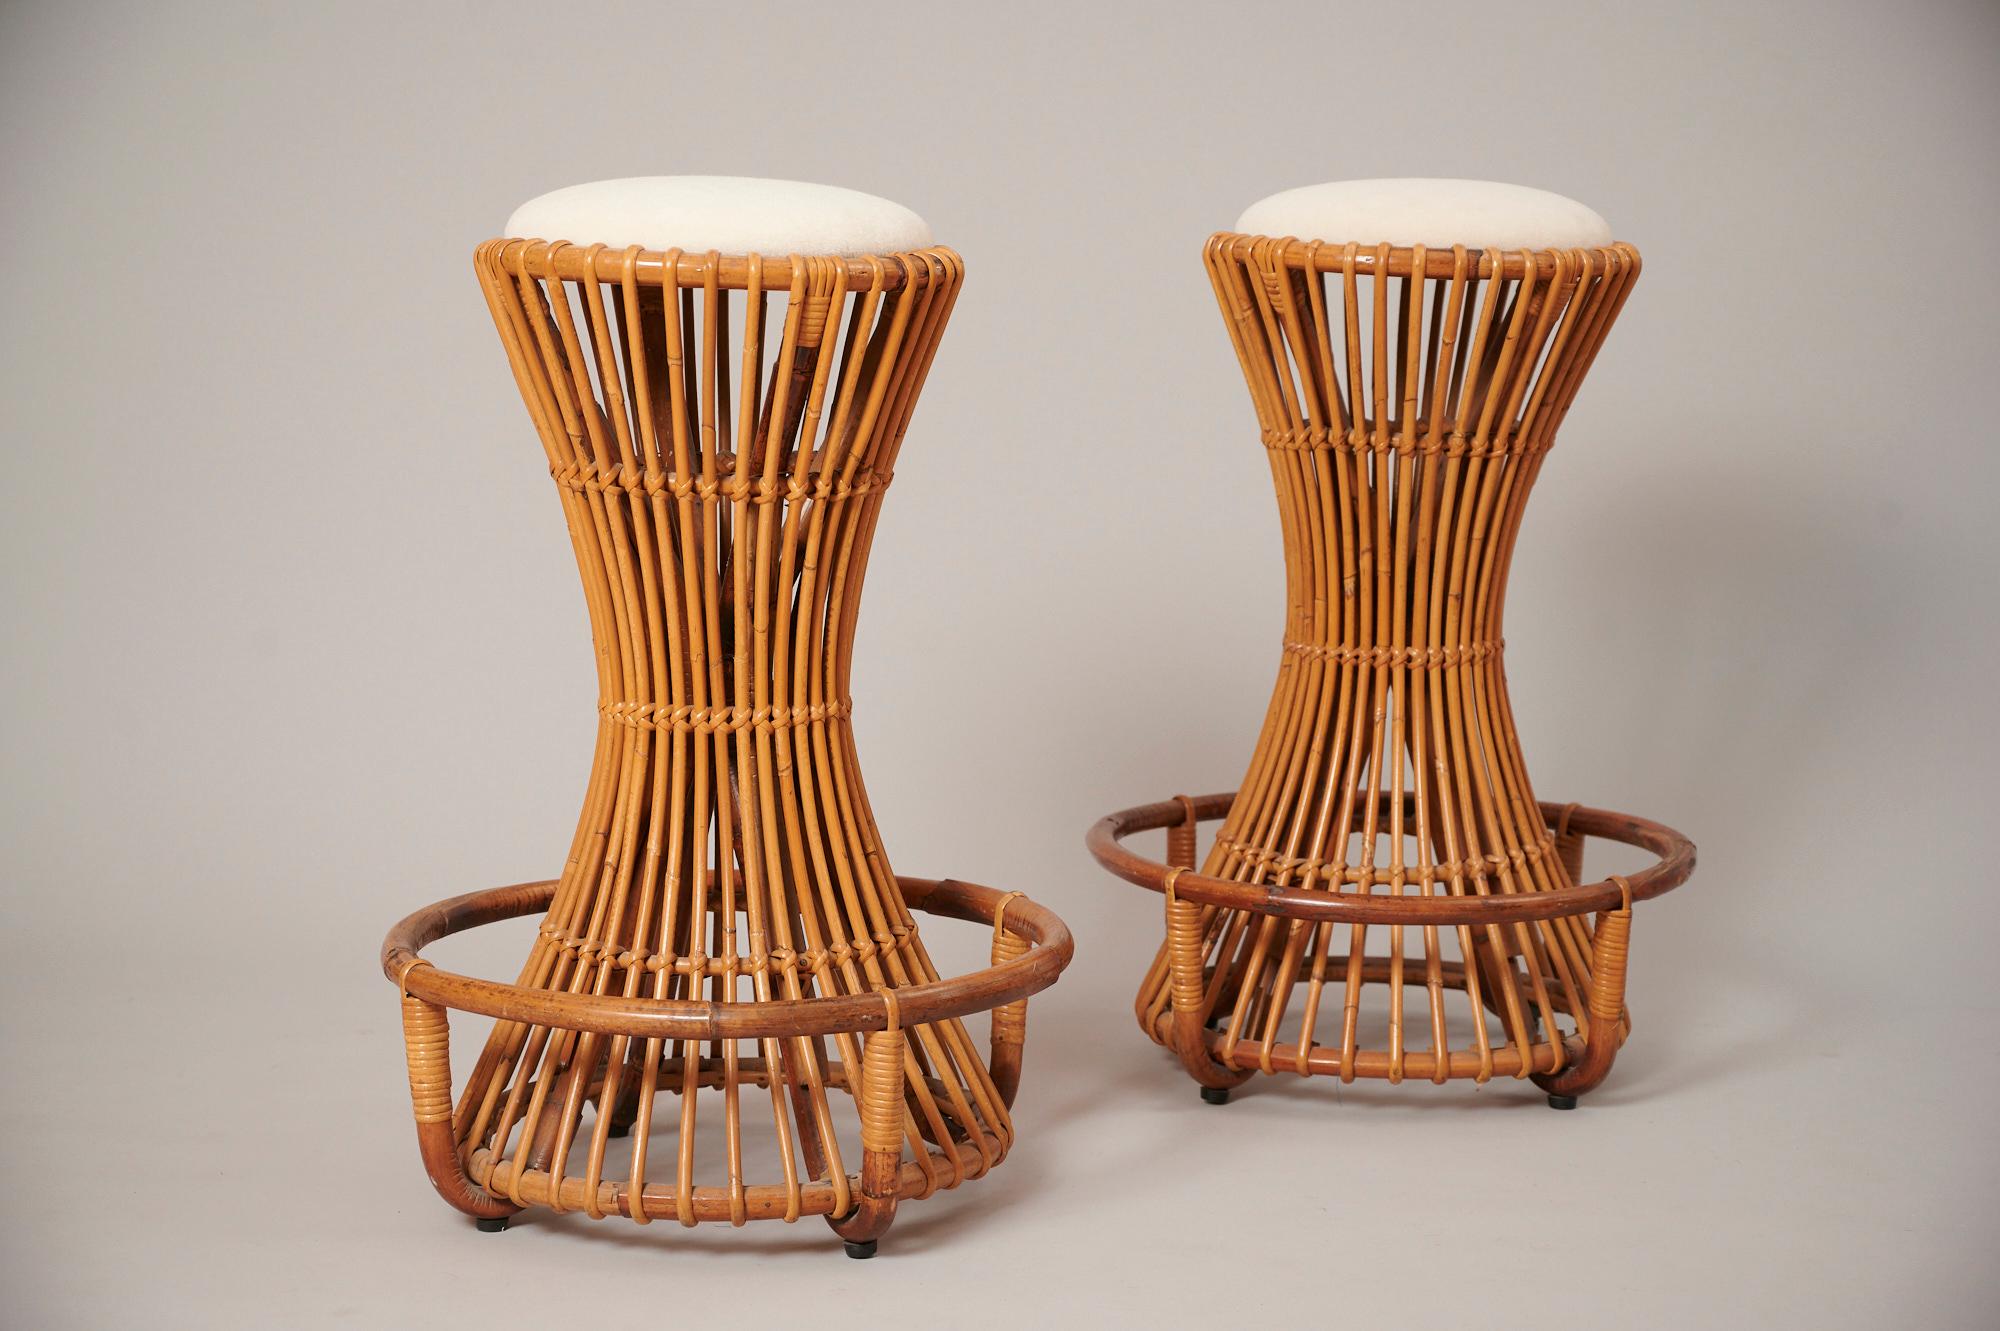 Rare bar stools in rattan by Tito Agnoli for Bonacina c1955.

Structurally sound and in good usable condition. Seats have been upholstered in an off white alpaca velvet.